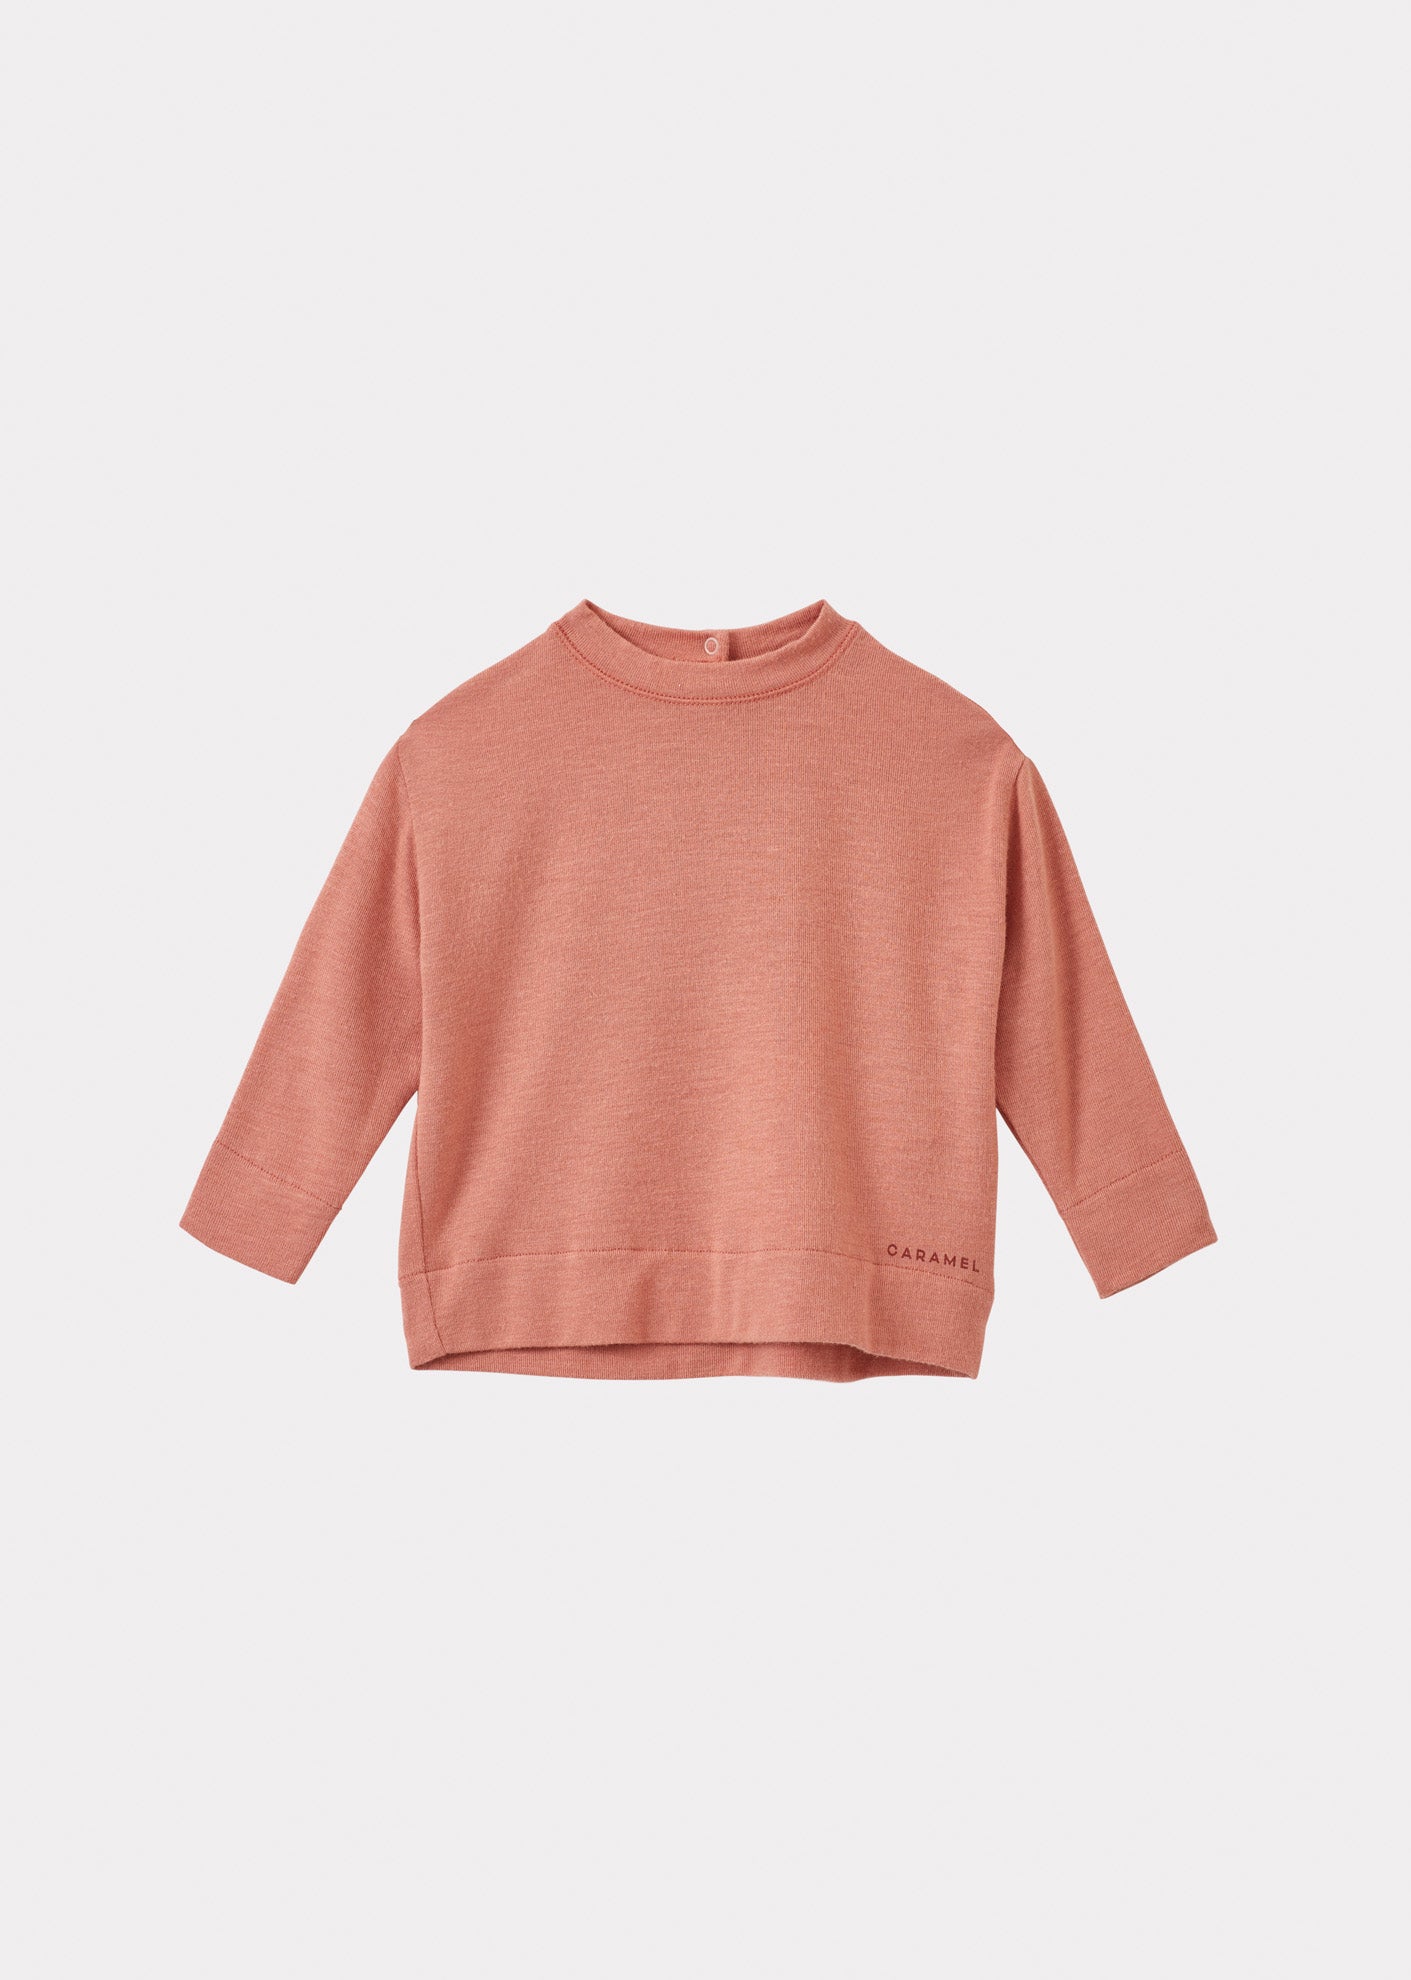 TODEA BABY T-SHIRT - DUSTY PINK